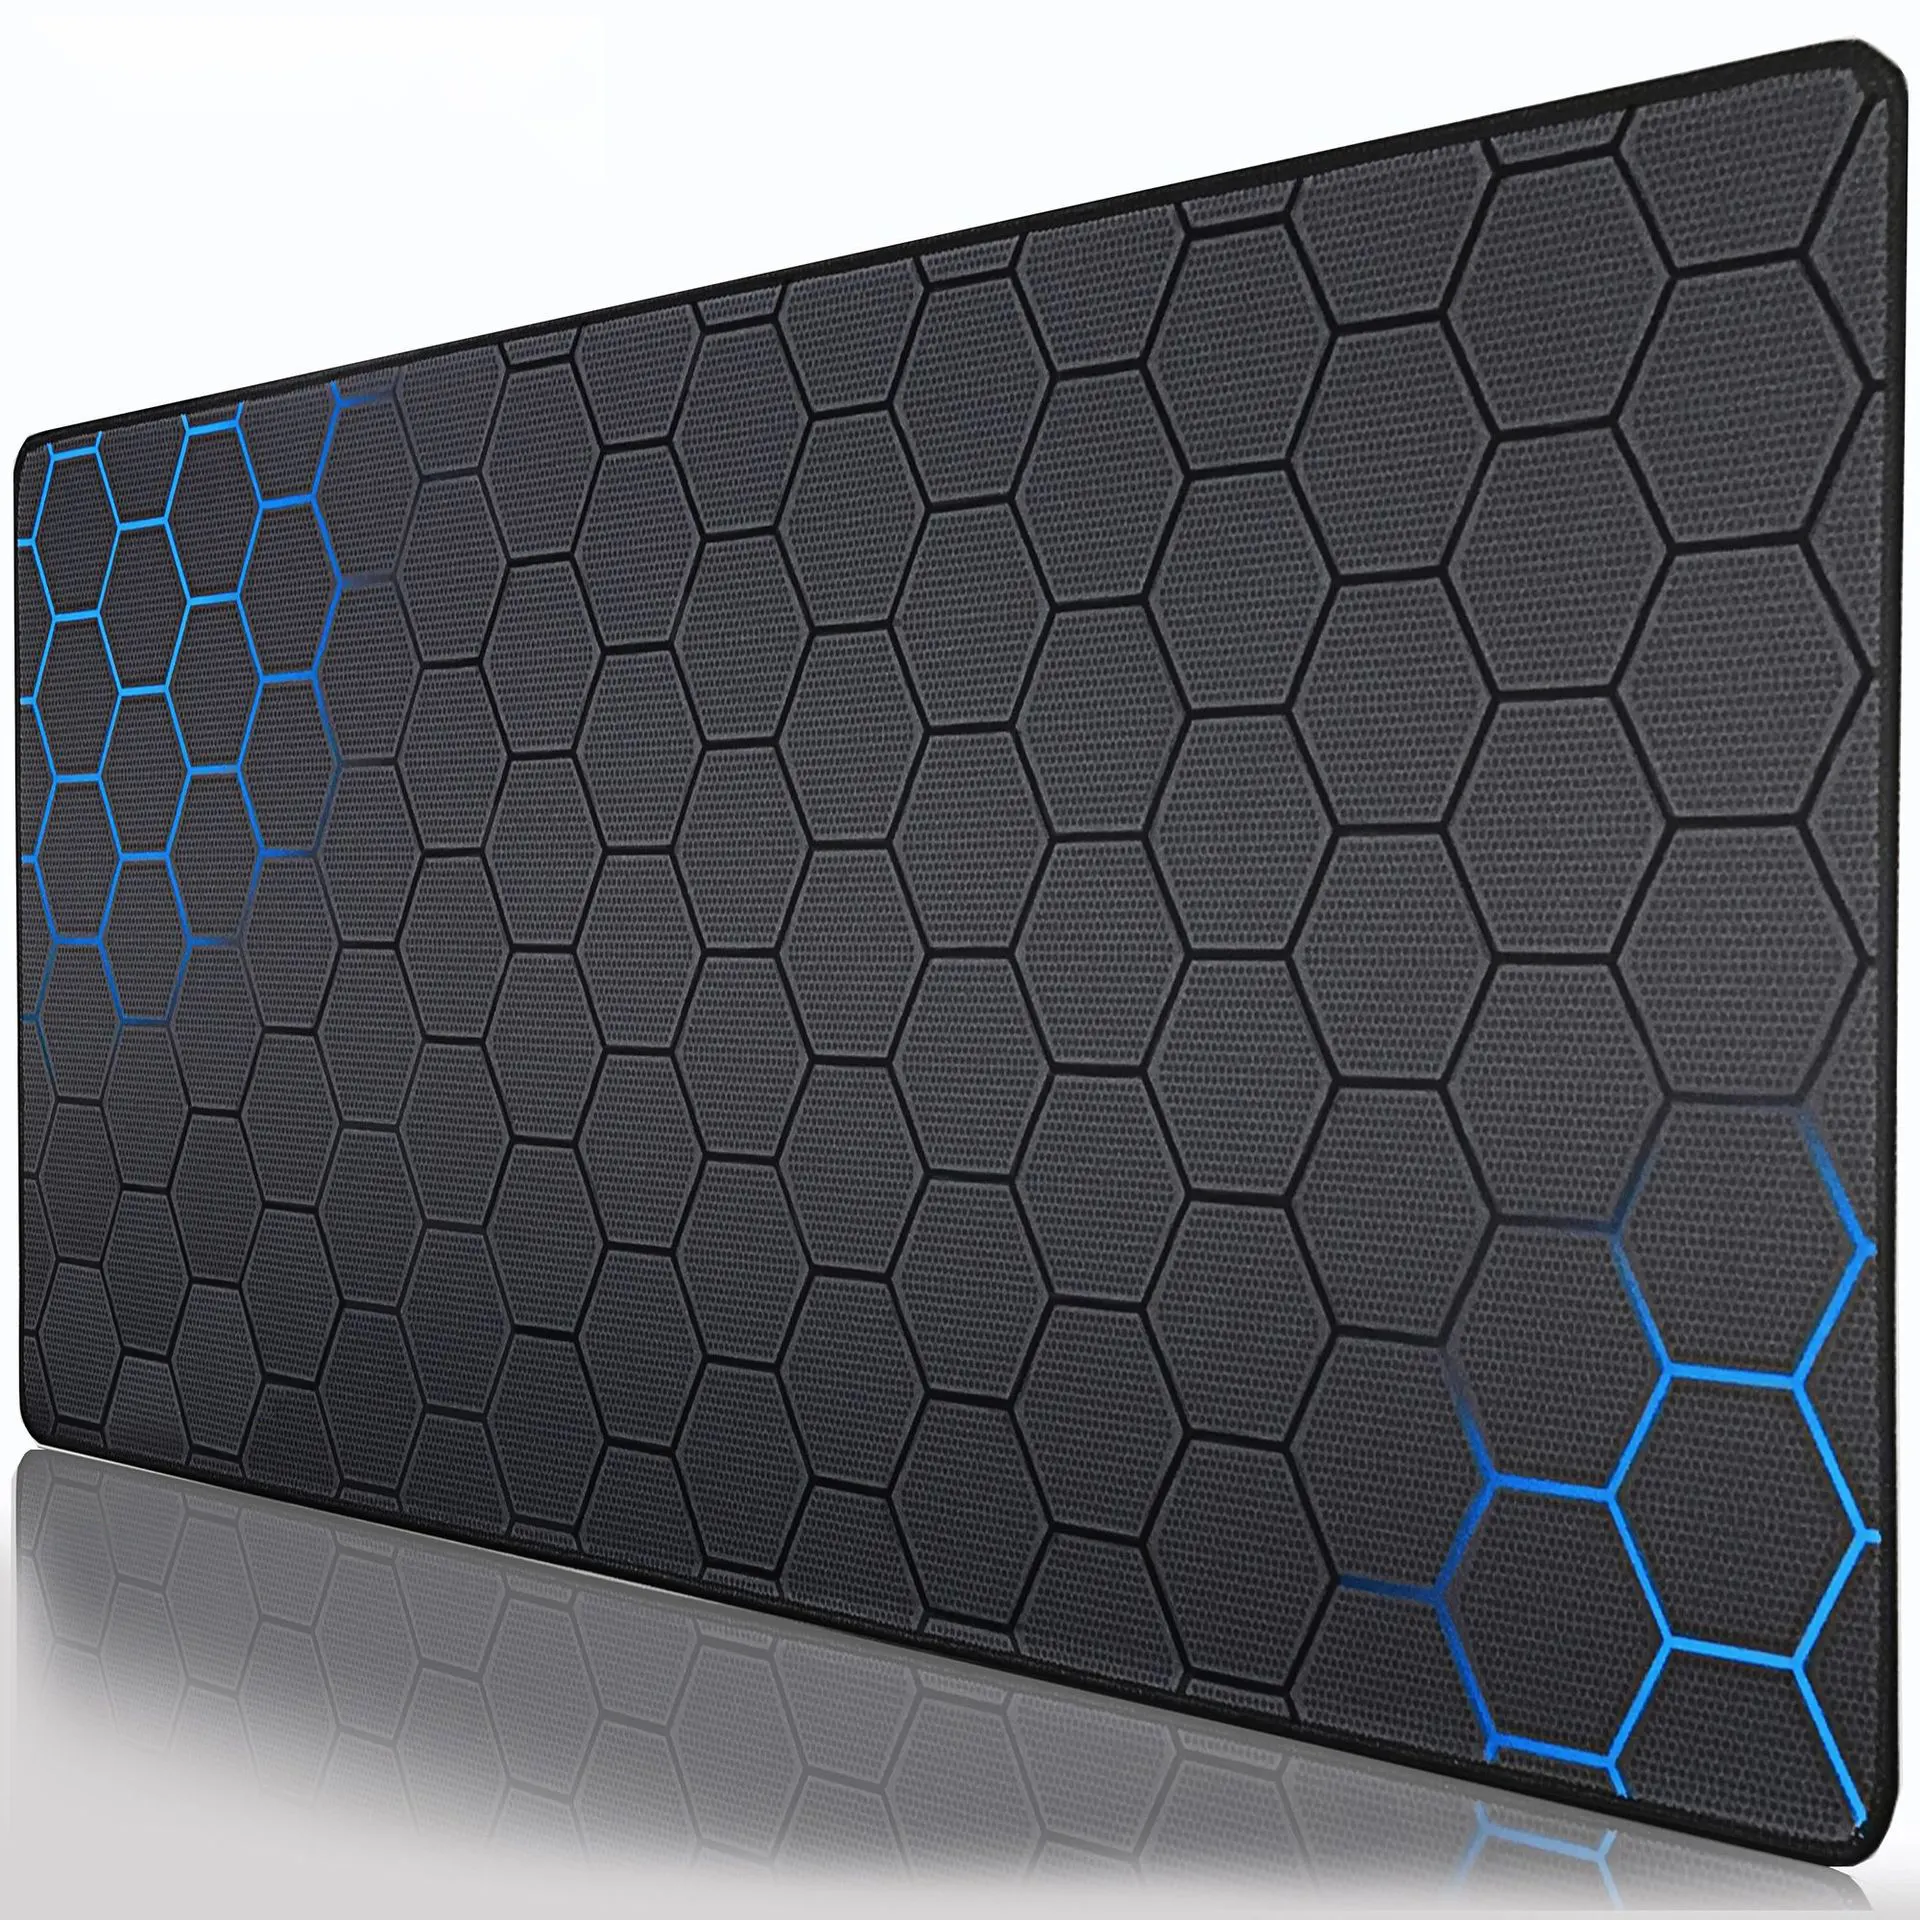 SAMA OEM Extended Big Gaming Mouse Pad Desk Pad Stitched Edge Computer Keyboard Mouse Mat Mousepad